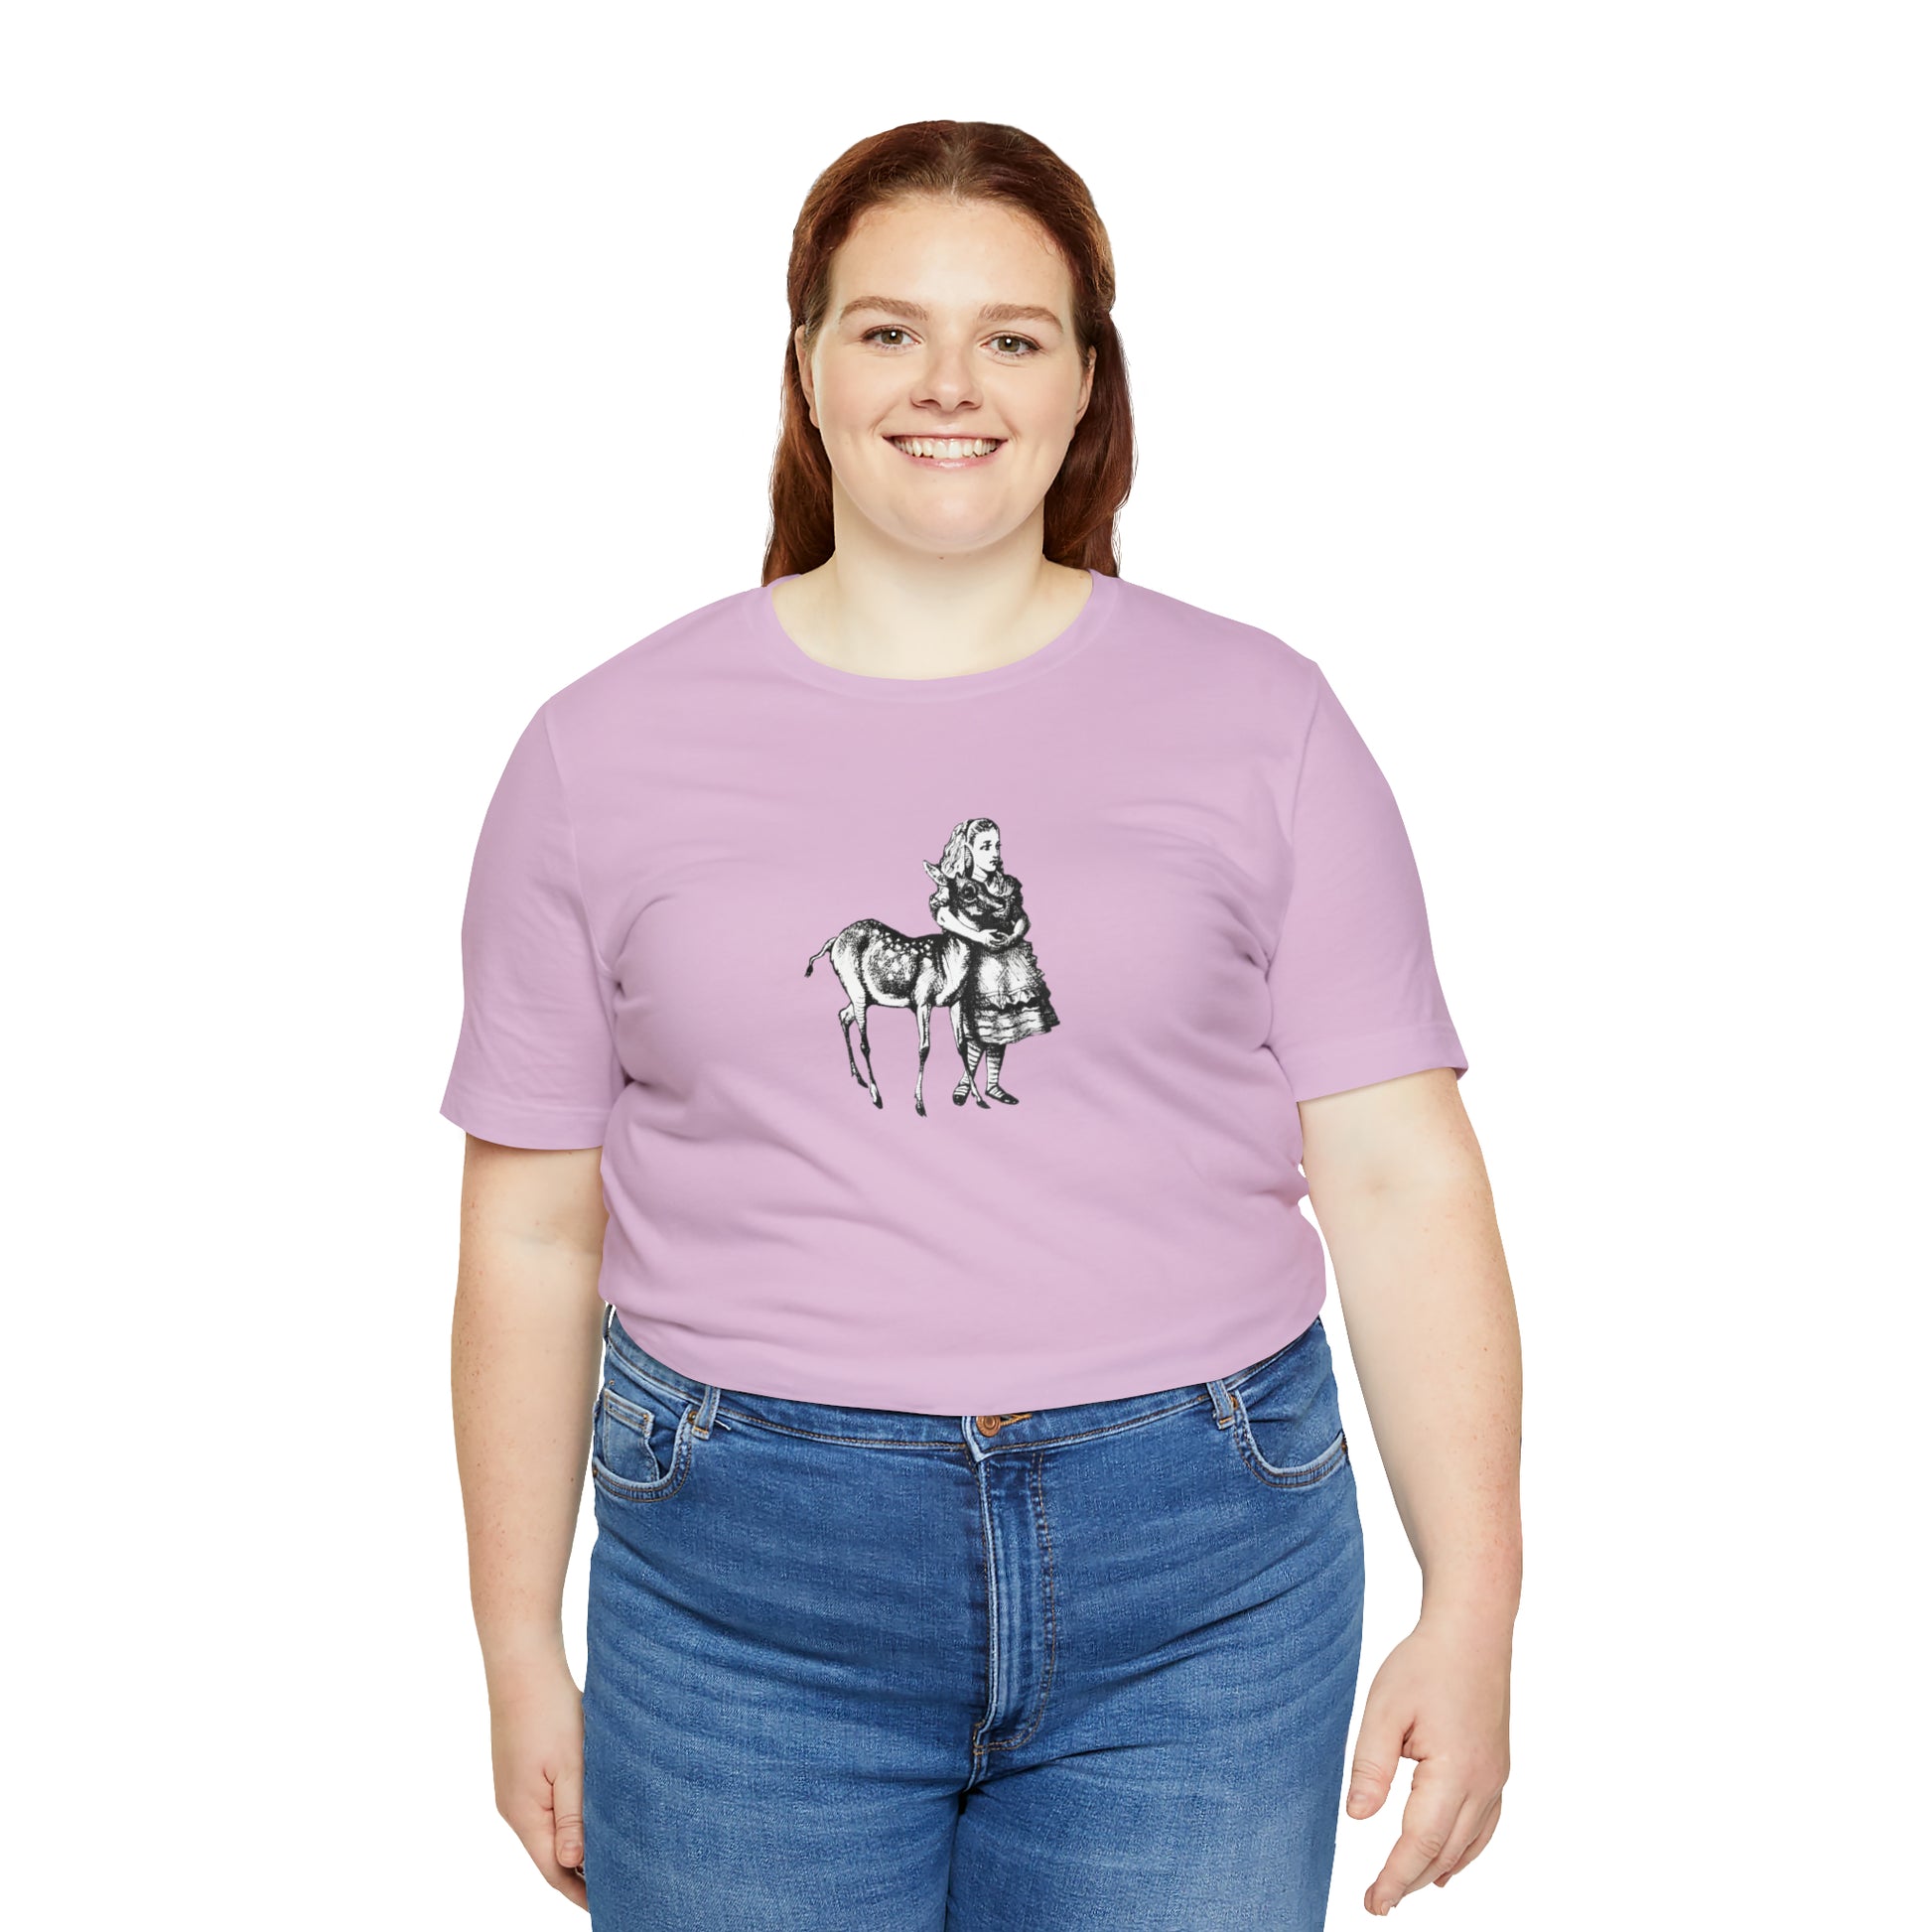 A smiling plus sized woman wearing a light purple t-shirt with an illustration of Alice in Wonderland and a baby deer printed in black.